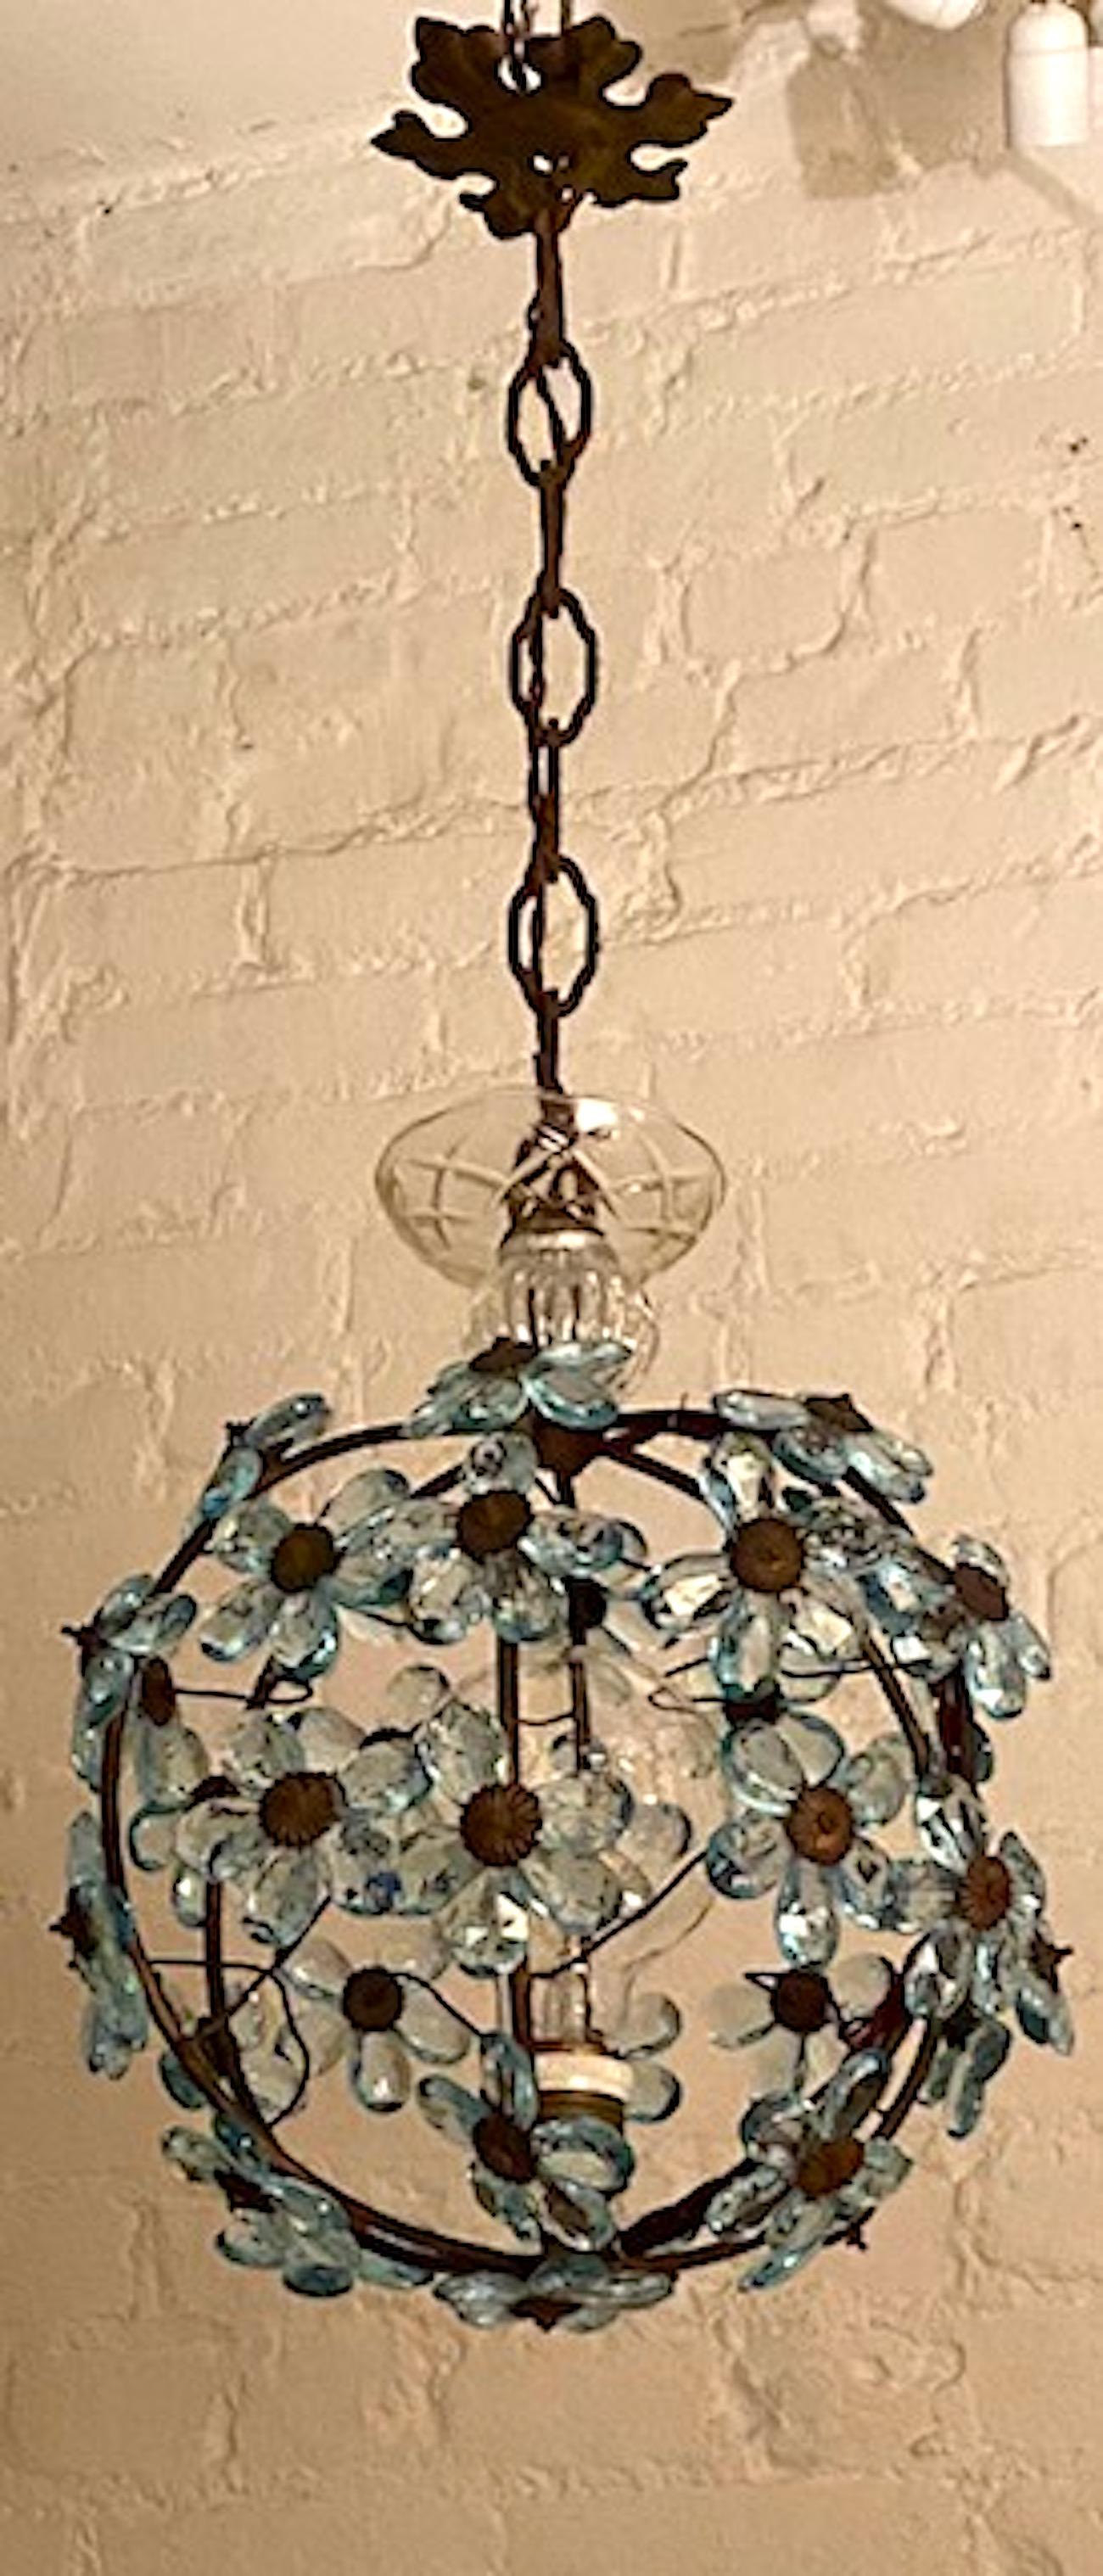 A charming Italian globe shape pendant light of light blue crystal flowers, circa 1960. The iron frame has an antique distressed bronze / brown patina. It is mounted with pale blue faceted crystal petal flowers. Just above the globe is a hand blown